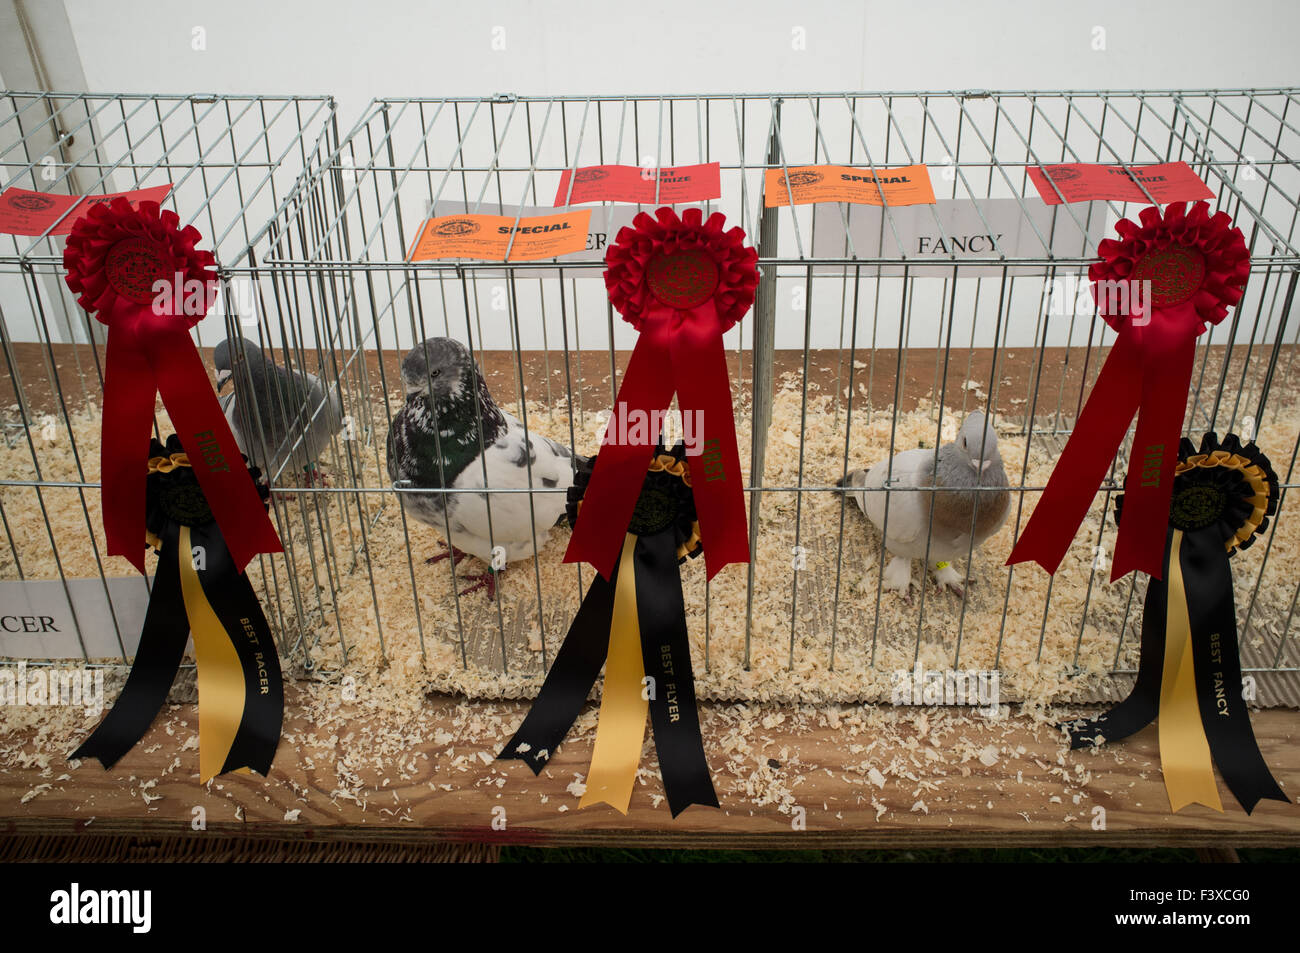 Pigeonsafter judging at the Stithians Agricultural show show in Cornwall UK Stock Photo